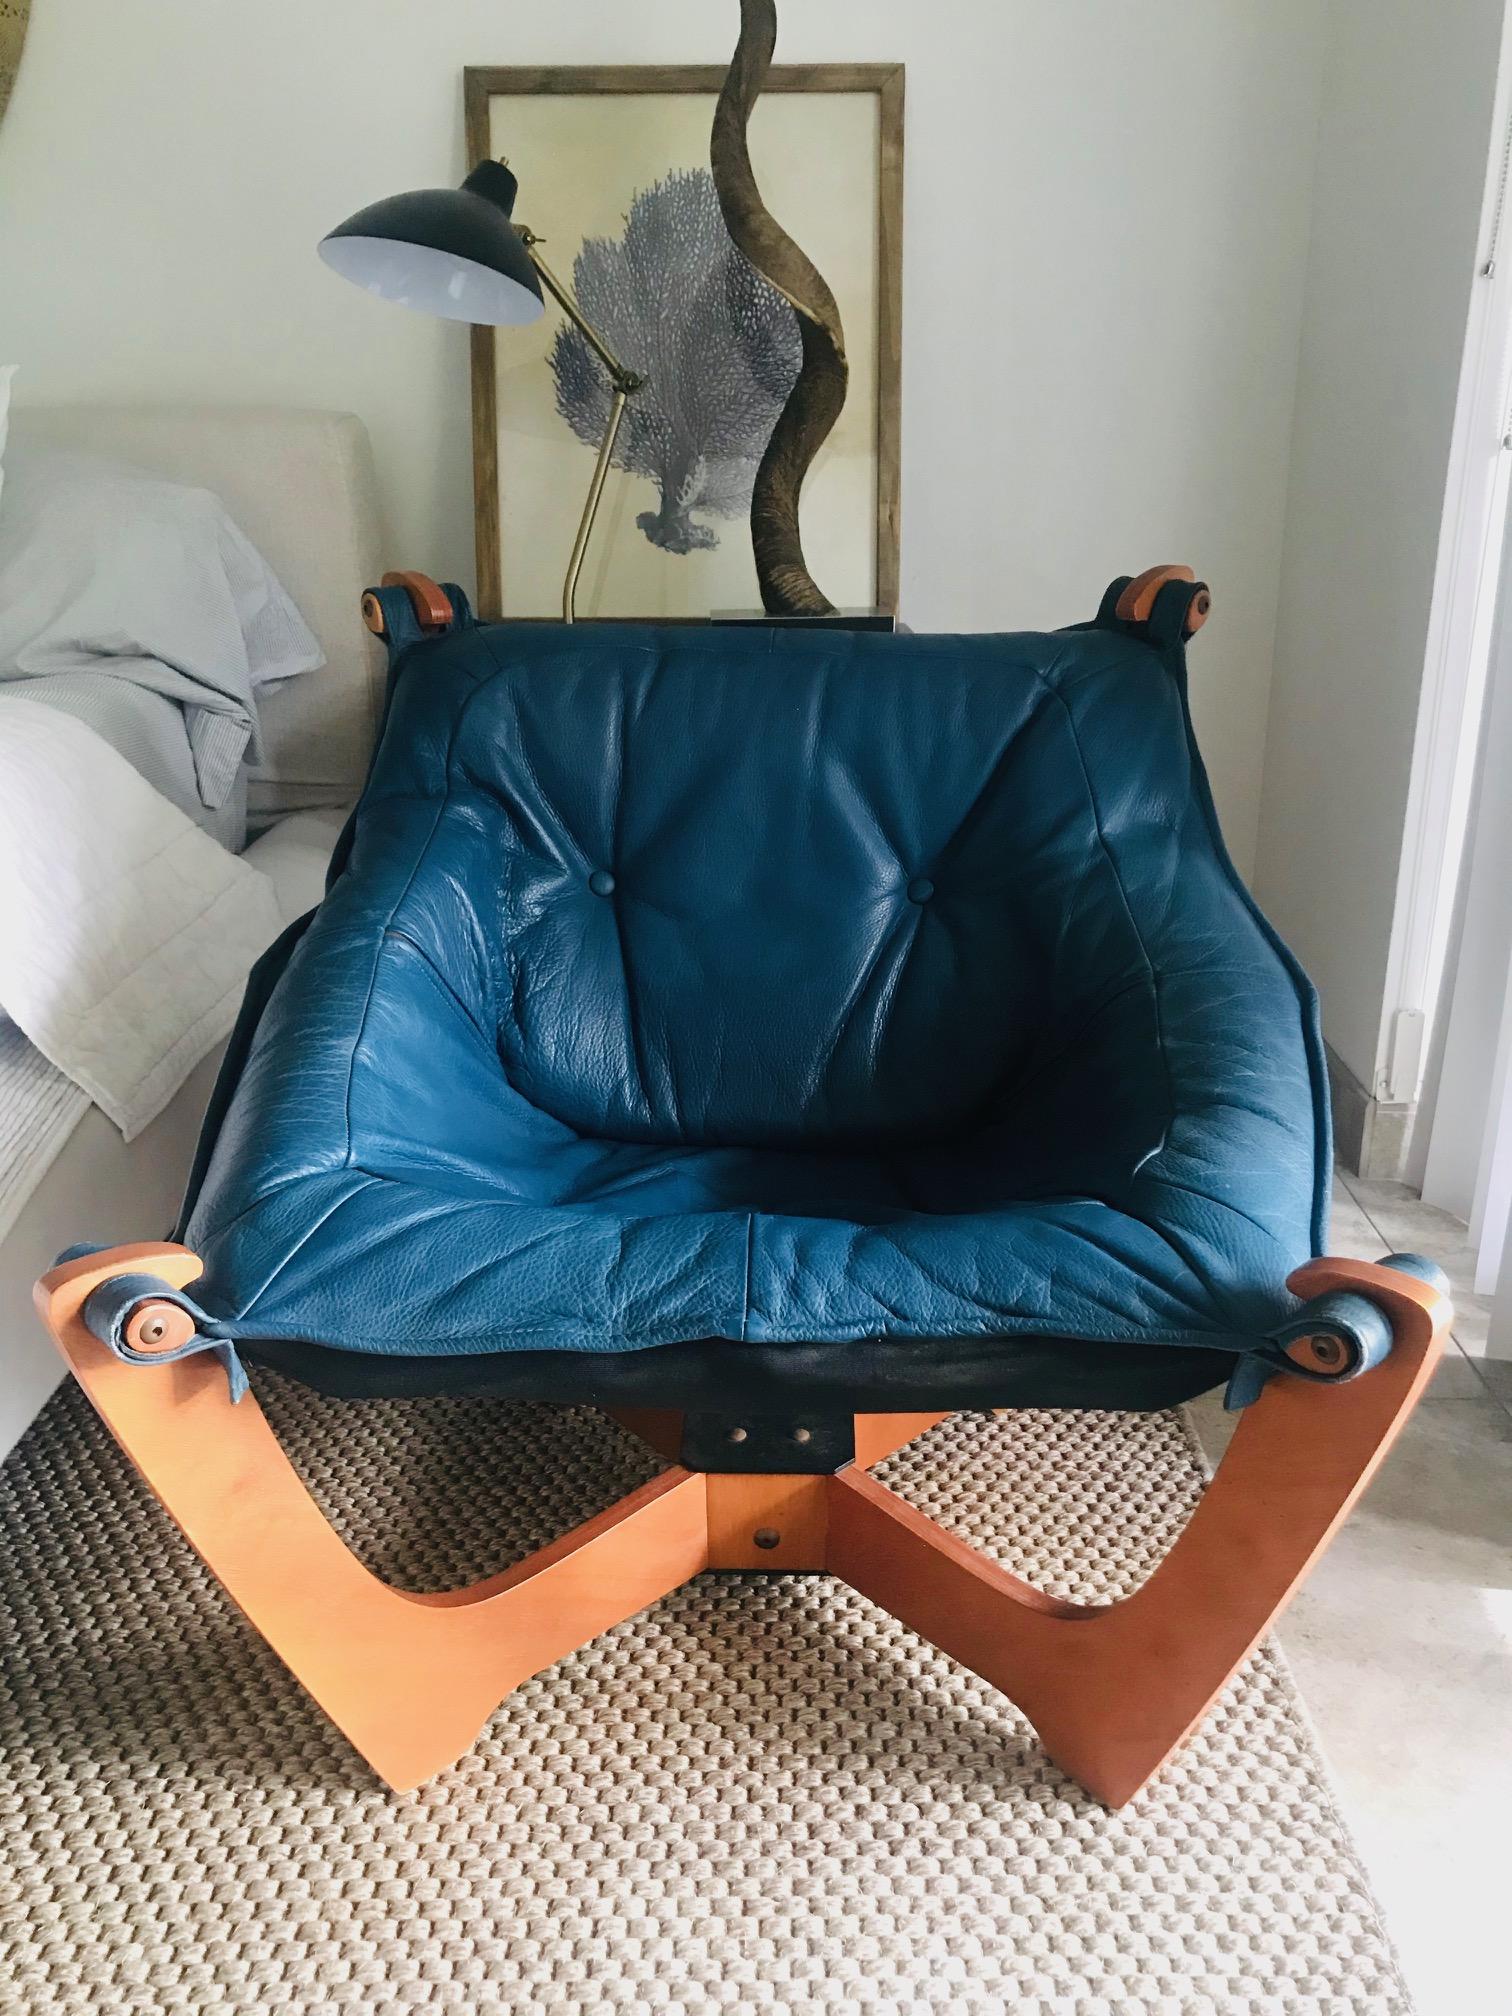 Scandinavian Modern lounge chair by Odd Knutsen, circa 1970s. Iconic sling chair with modernist four post frame design in molded plywood with teak finish and bronzed rivets. Chair features a an adaptable padded seat with a sling design in beautiful